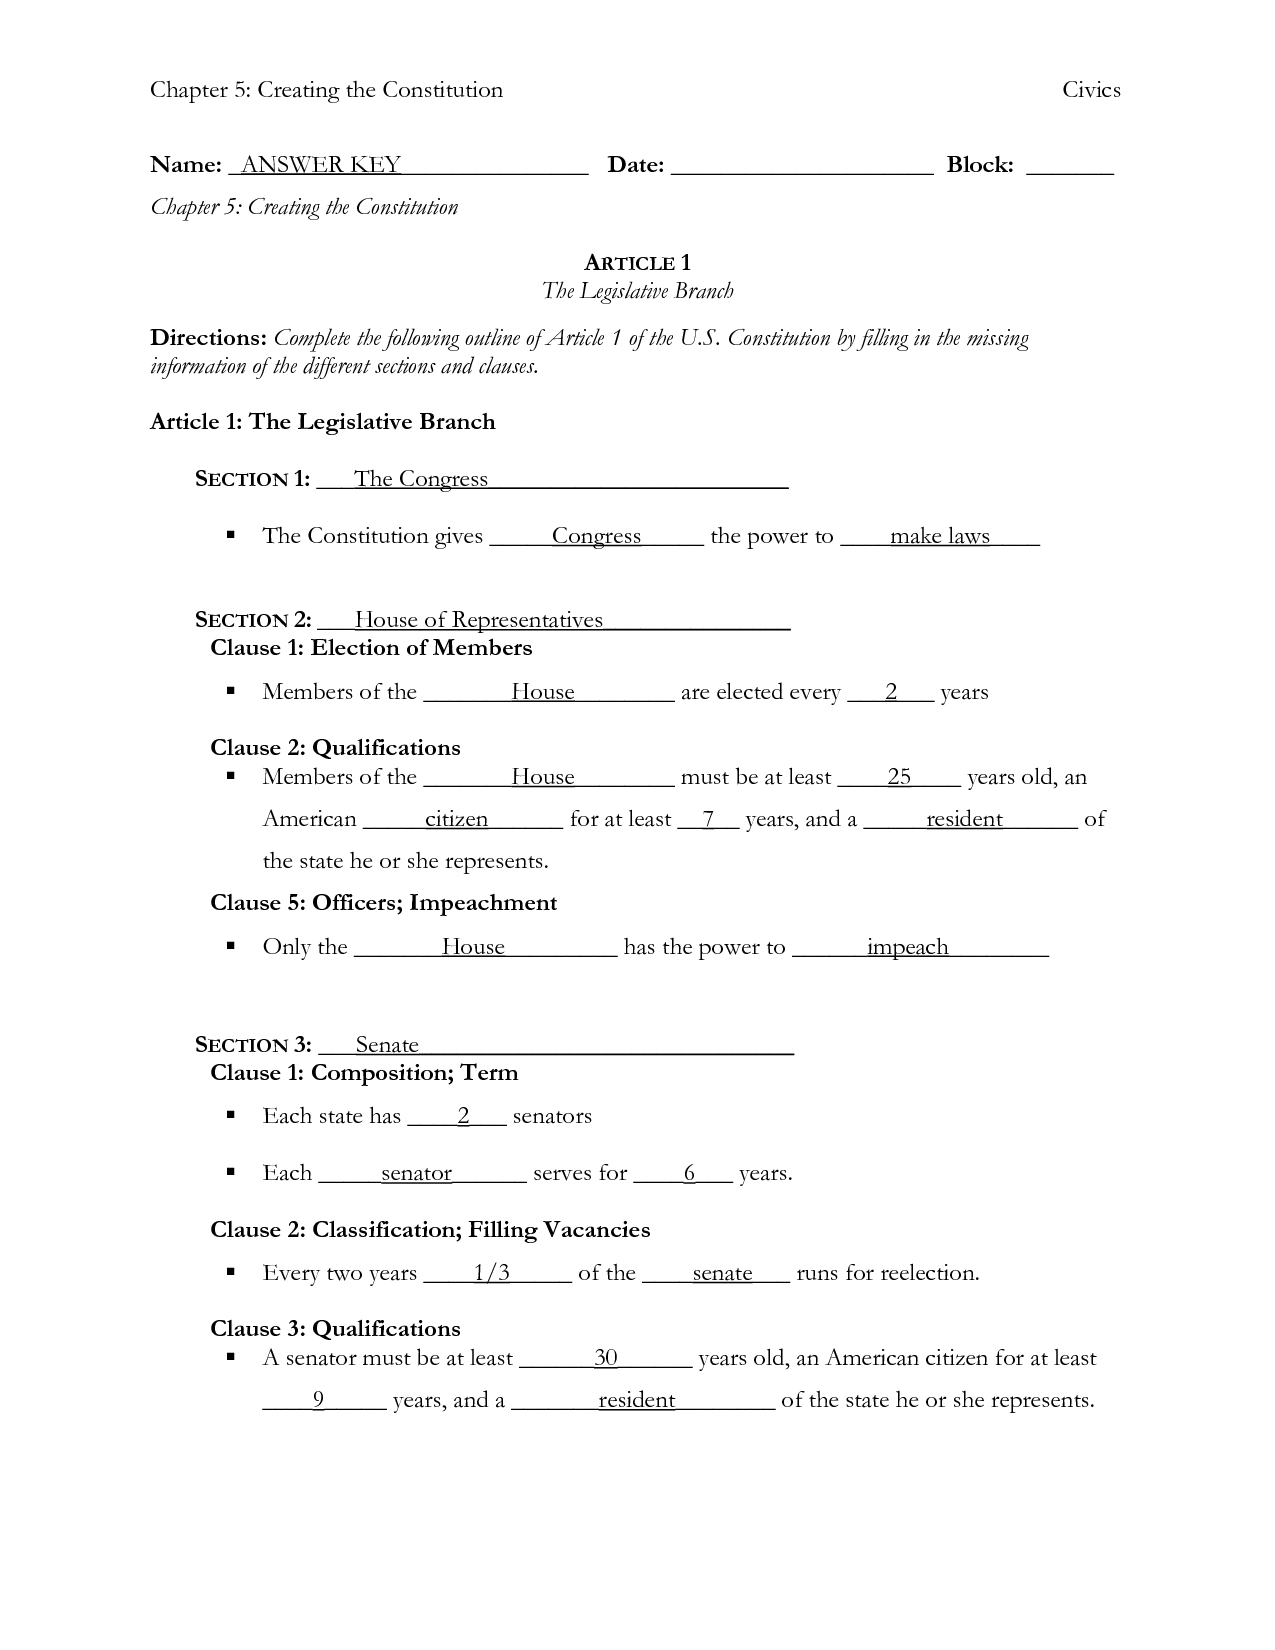 11-best-images-of-is-it-constitutional-worksheet-constitution-amendments-worksheets-creating